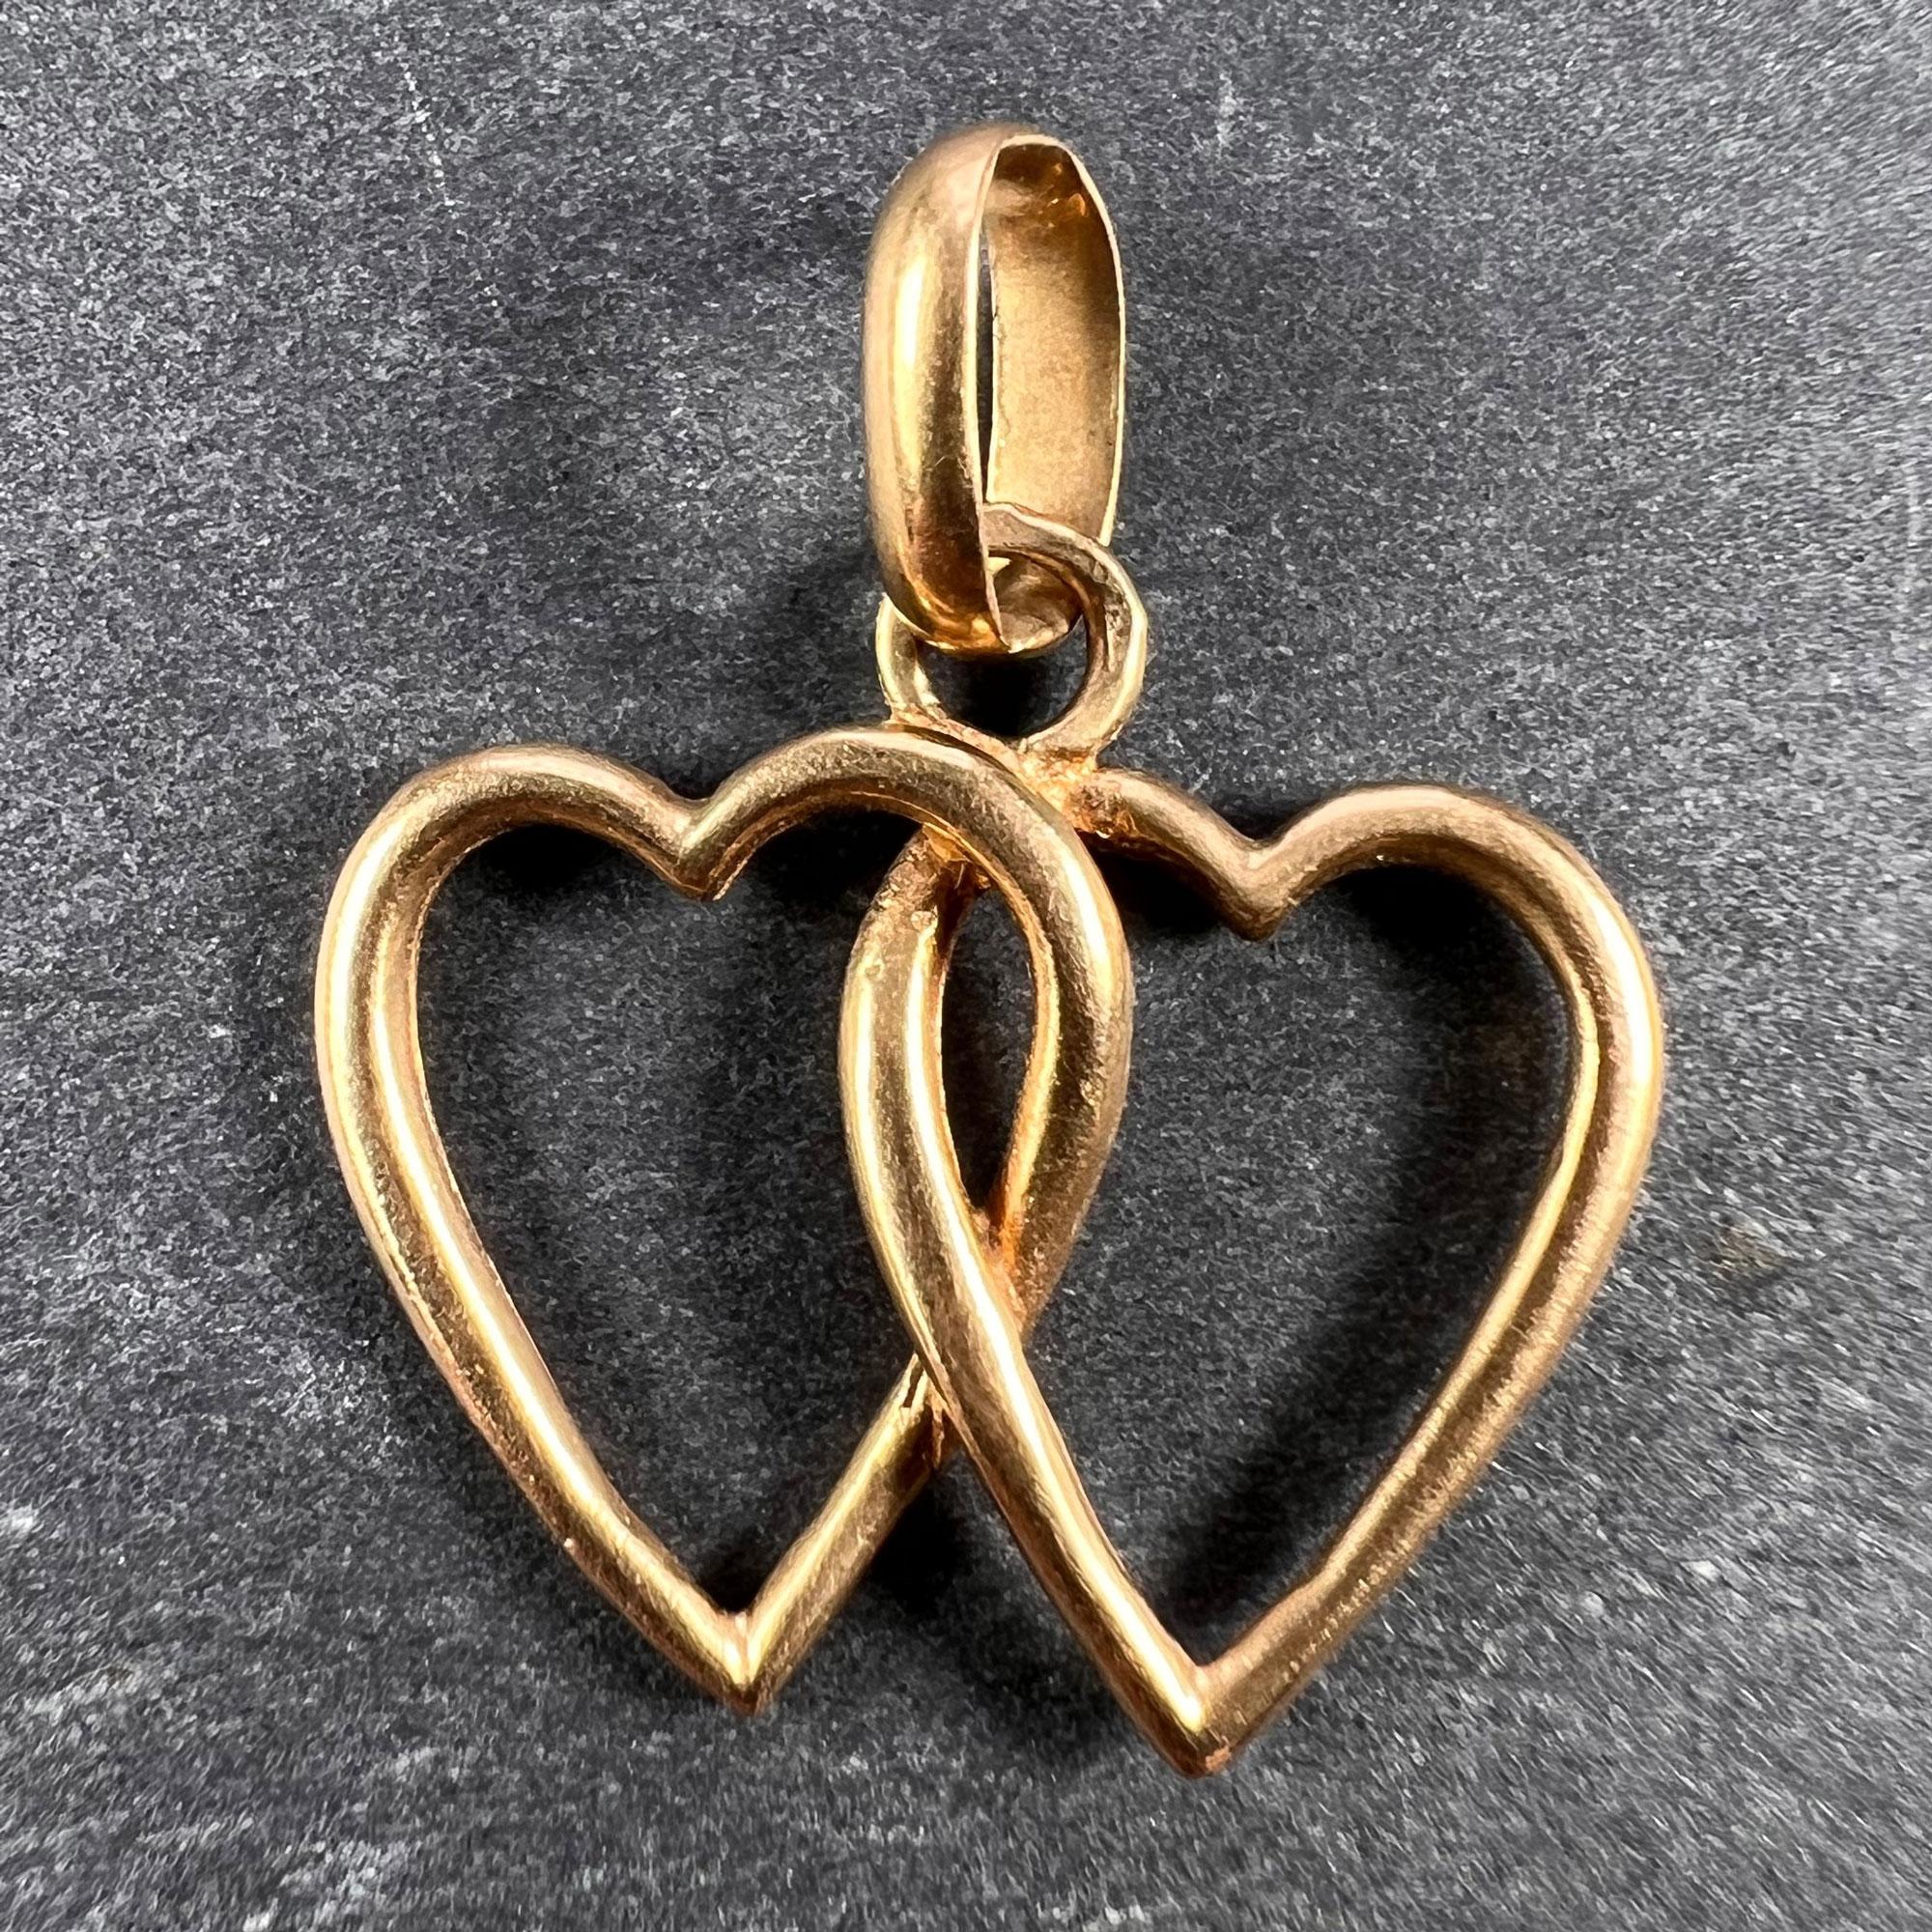 An 18 karat (18K) yellow gold charm pendant designed as a pair of entwined love hearts. Stamped with the eagle's head for 18 karat gold and French manufacture, along with an unknown maker's mark.

Dimensions: 1.5 x 1.7 x 0.2 cm (not including jump